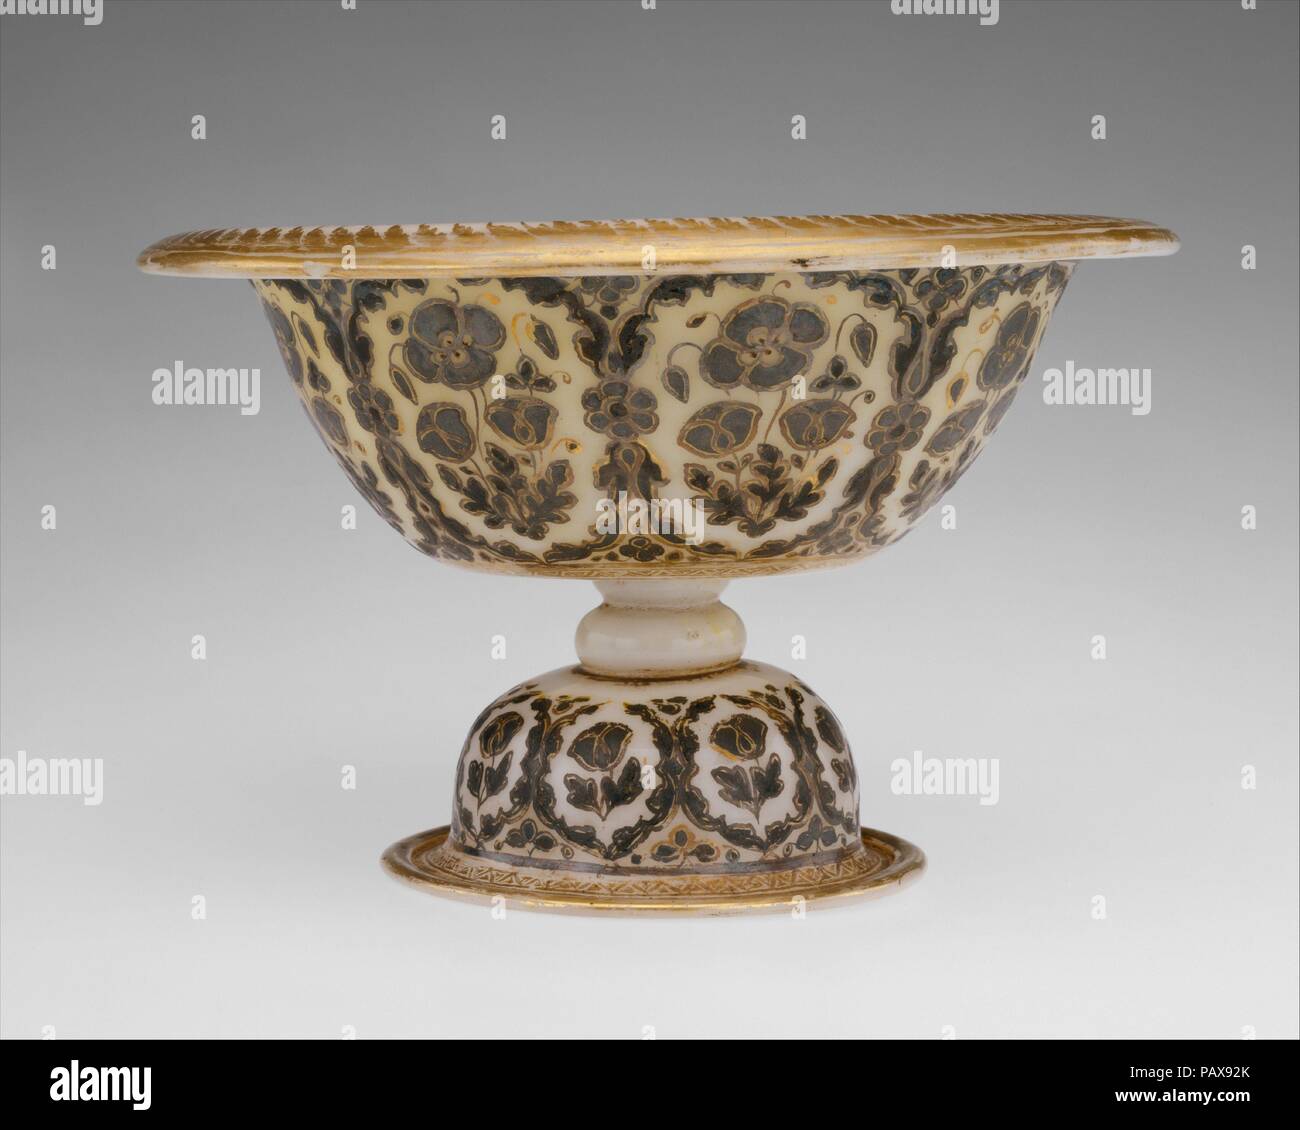 Footed Bowl and Plate. Dimensions: Bowl - H. 4 3/4 in. (12.1 cm) W. 8 in.  (20.3 cm) Dish - Diam. 10 in. (25.4 cm). Date: first half 18th century. Of  all